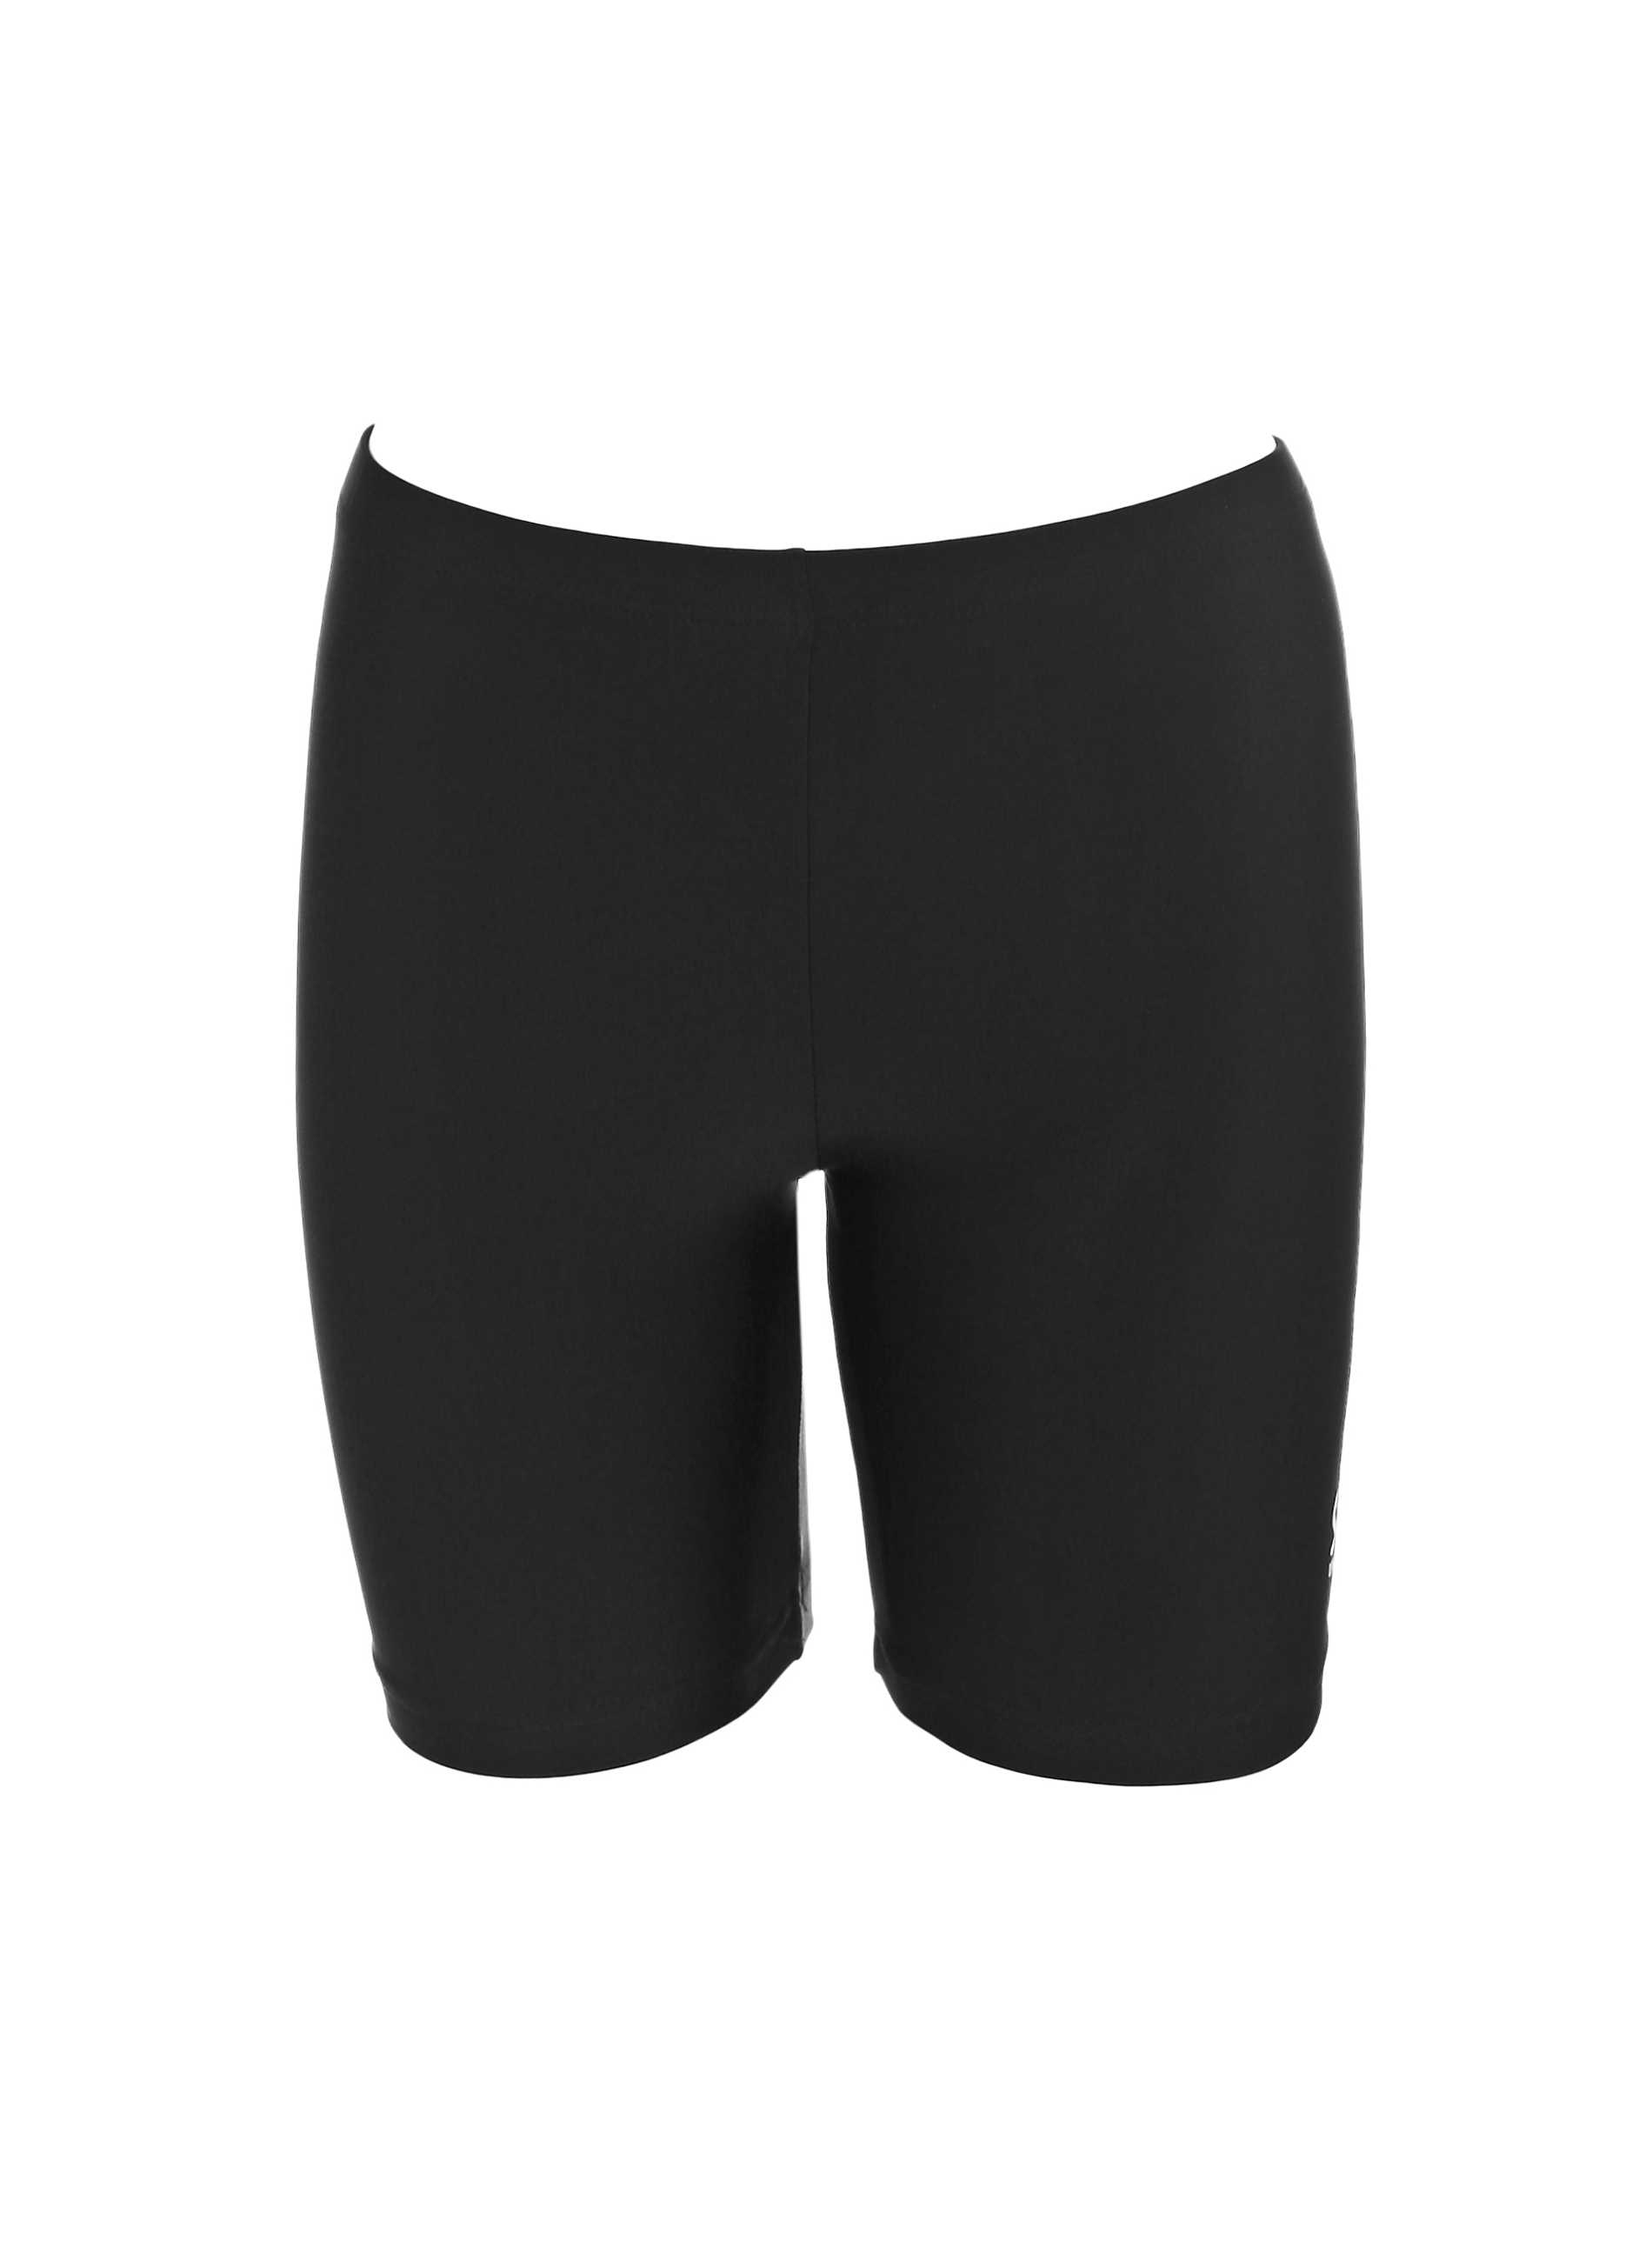 Short tights for Swimming and Running